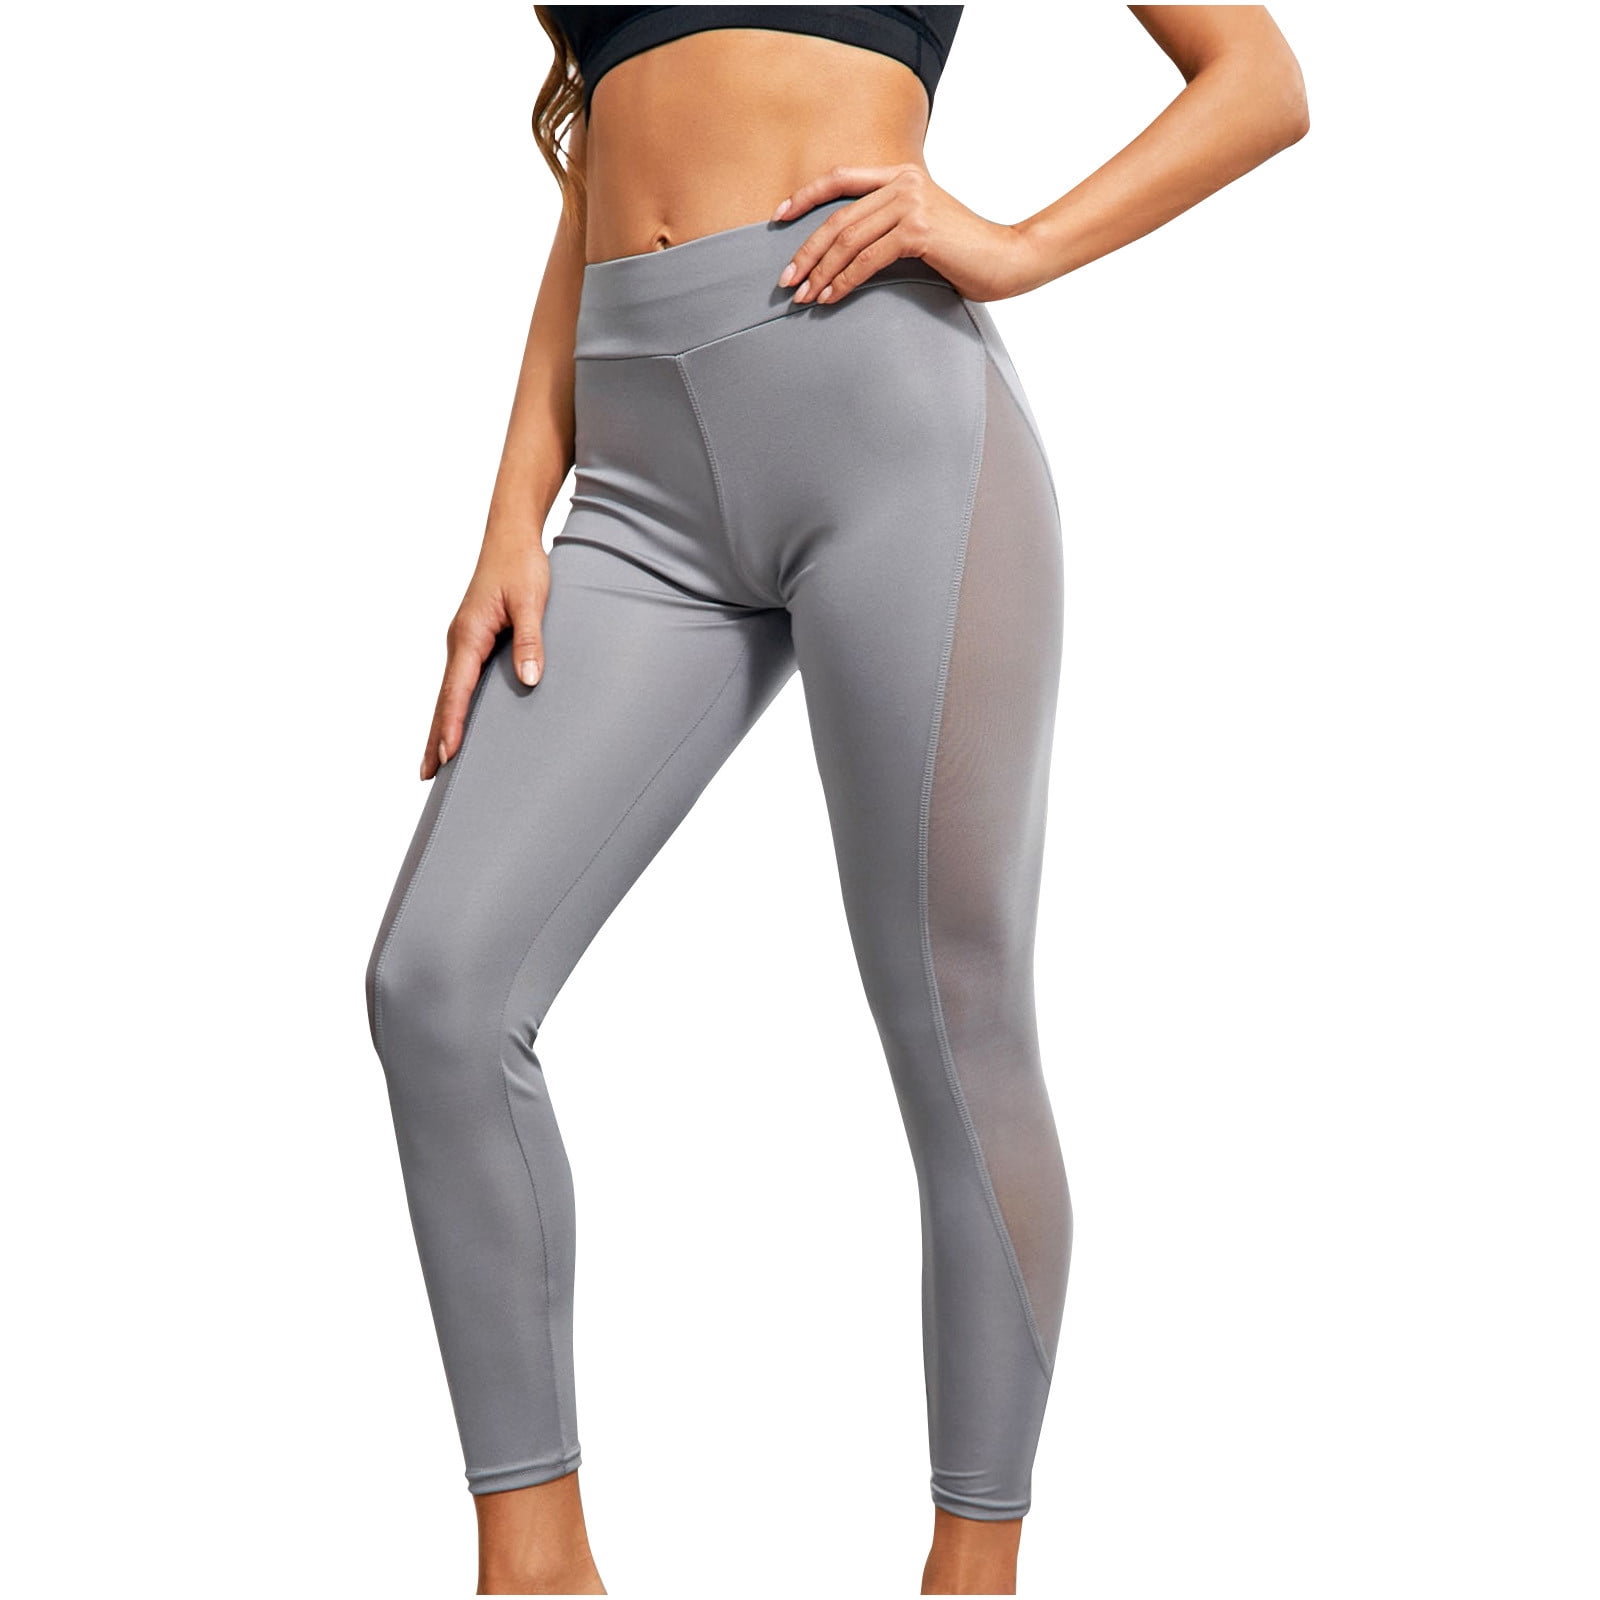 BLVB Seamless Yoga Leggings for Women Mesh High Waisted Gym Sports Pants  Stretch Athletic Fitness Tights